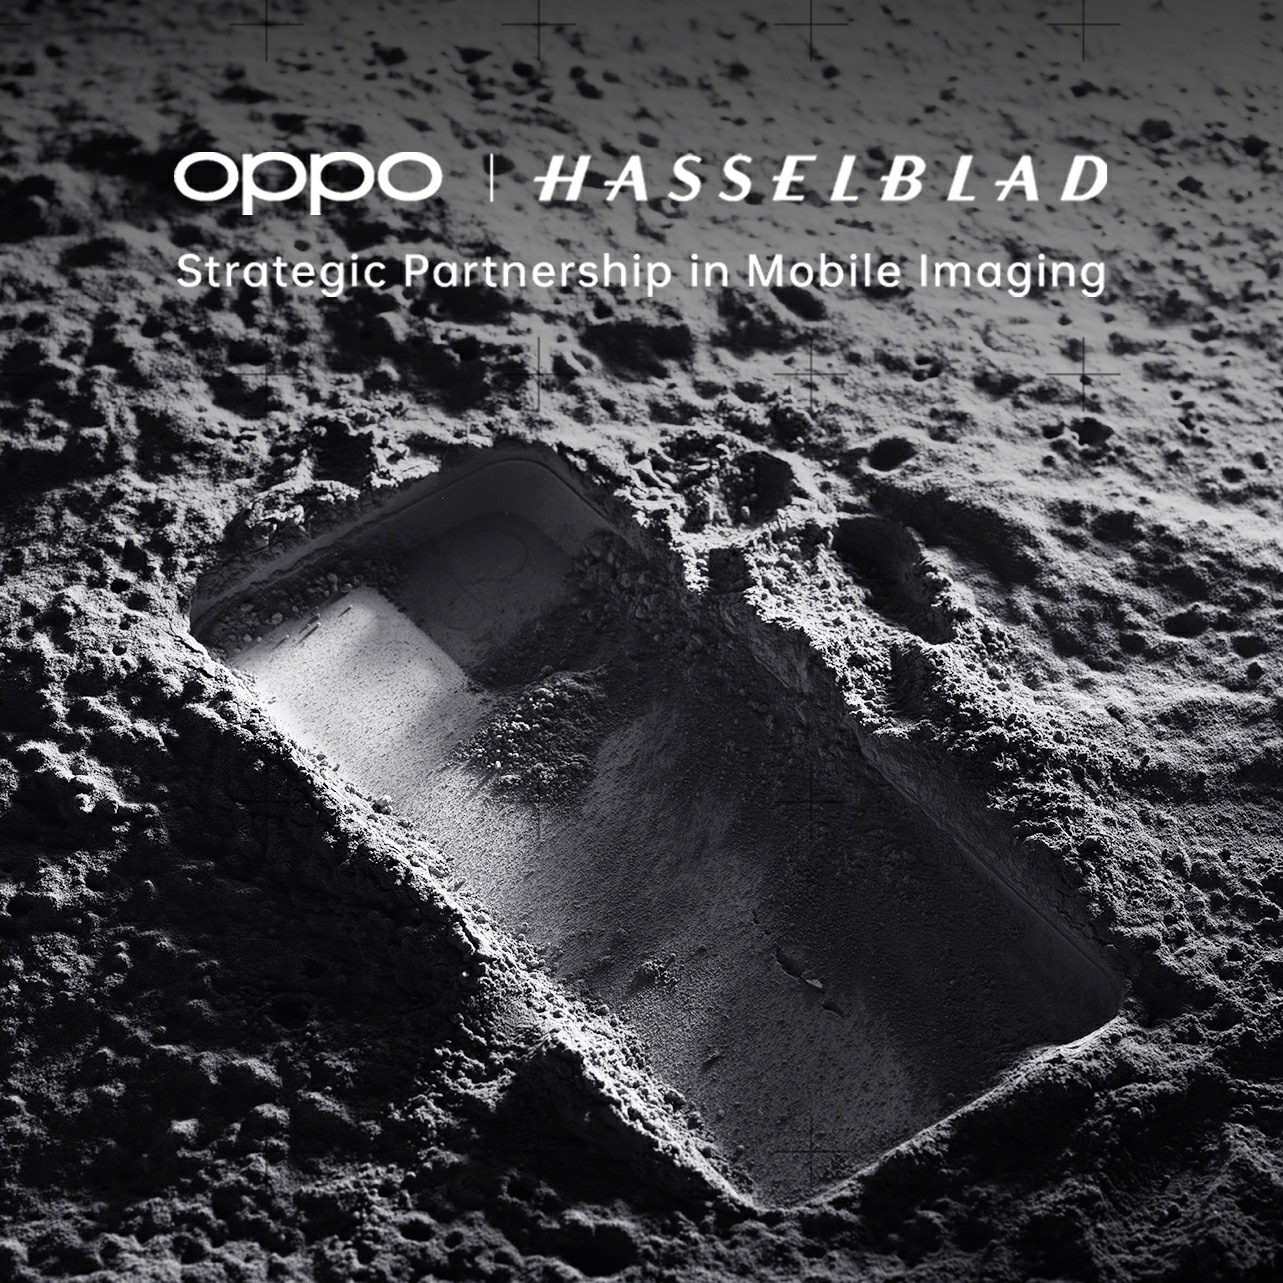 The launch imagery of the new OPPO and Hasselblad partnership echoes the famous 'Moon footprint' image shot on a Hasselblad